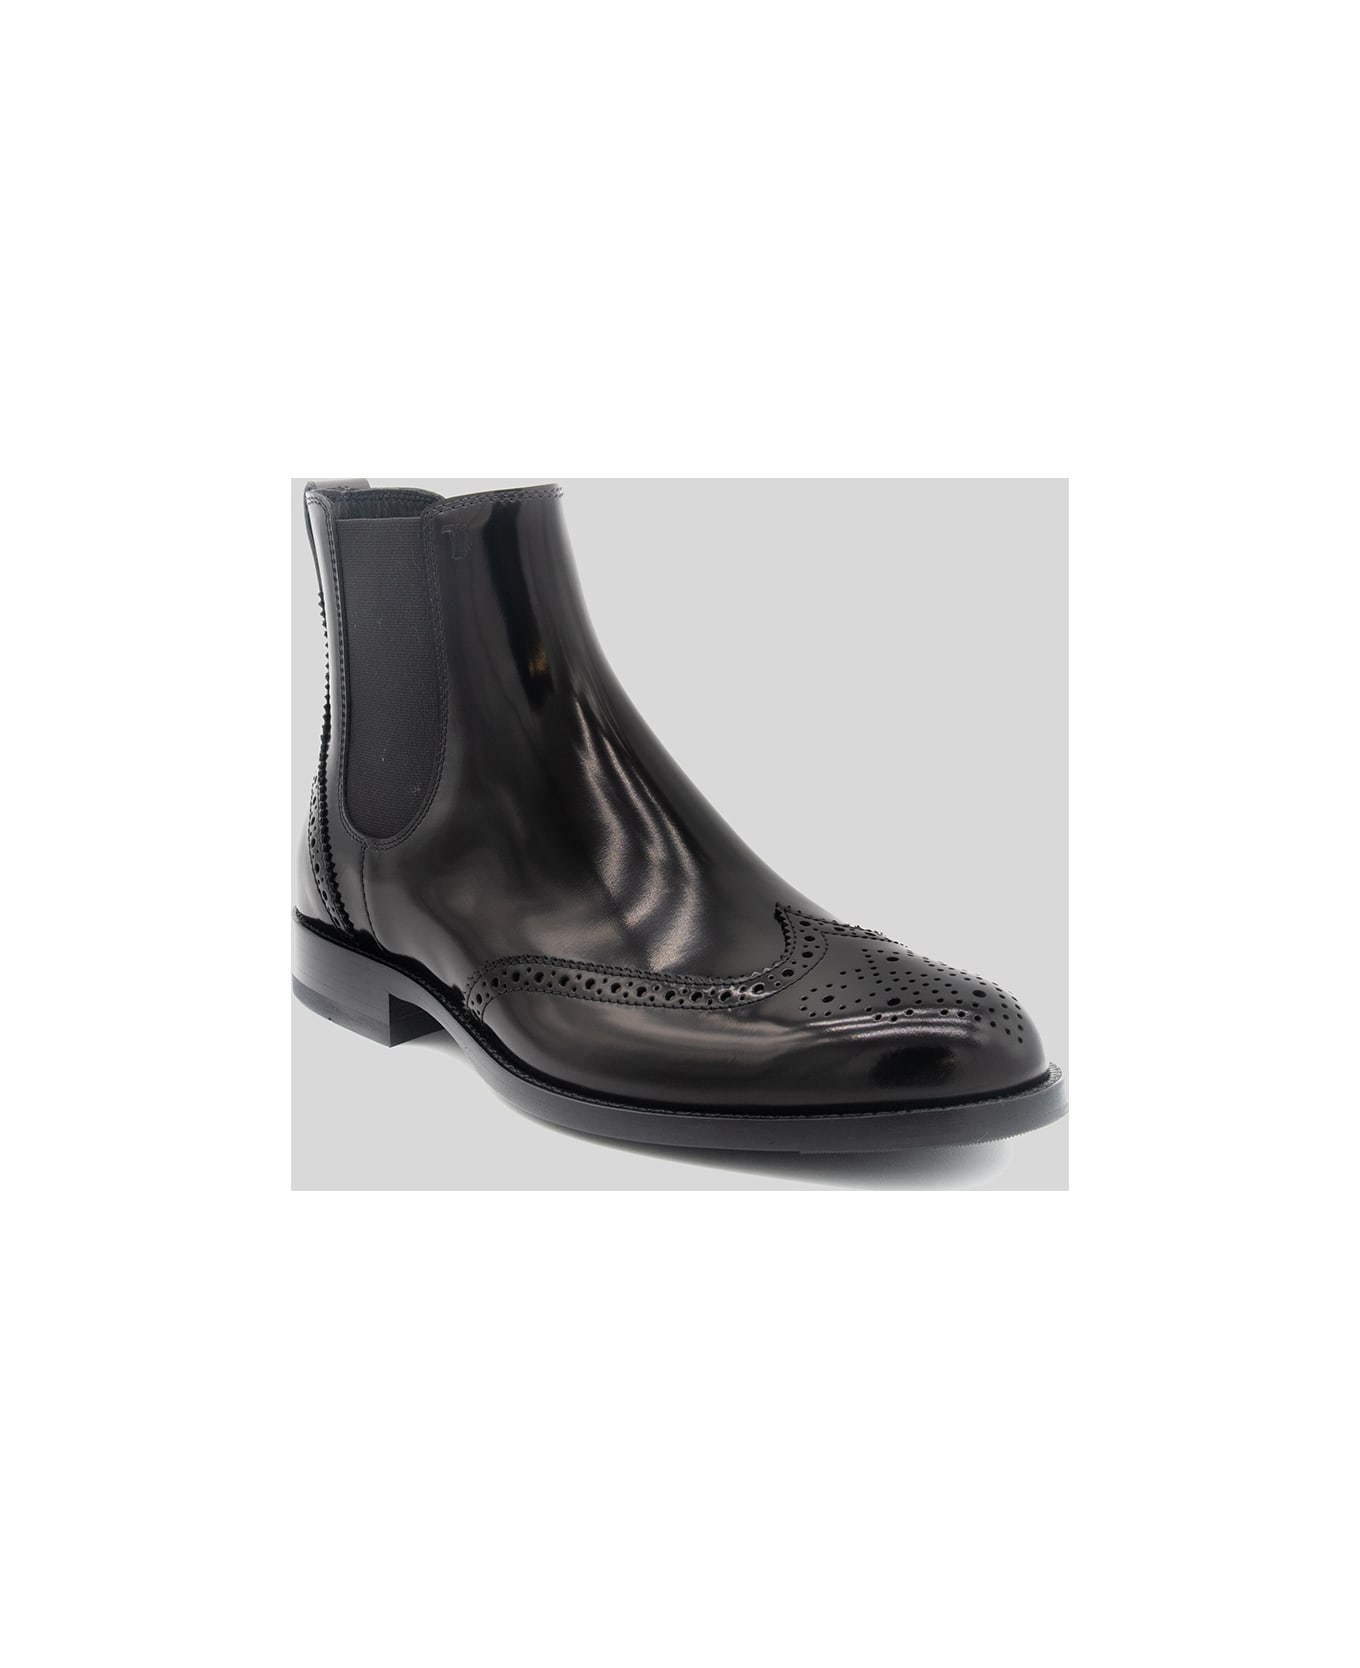 Tod's Black Leather Boots - Black ブーツ